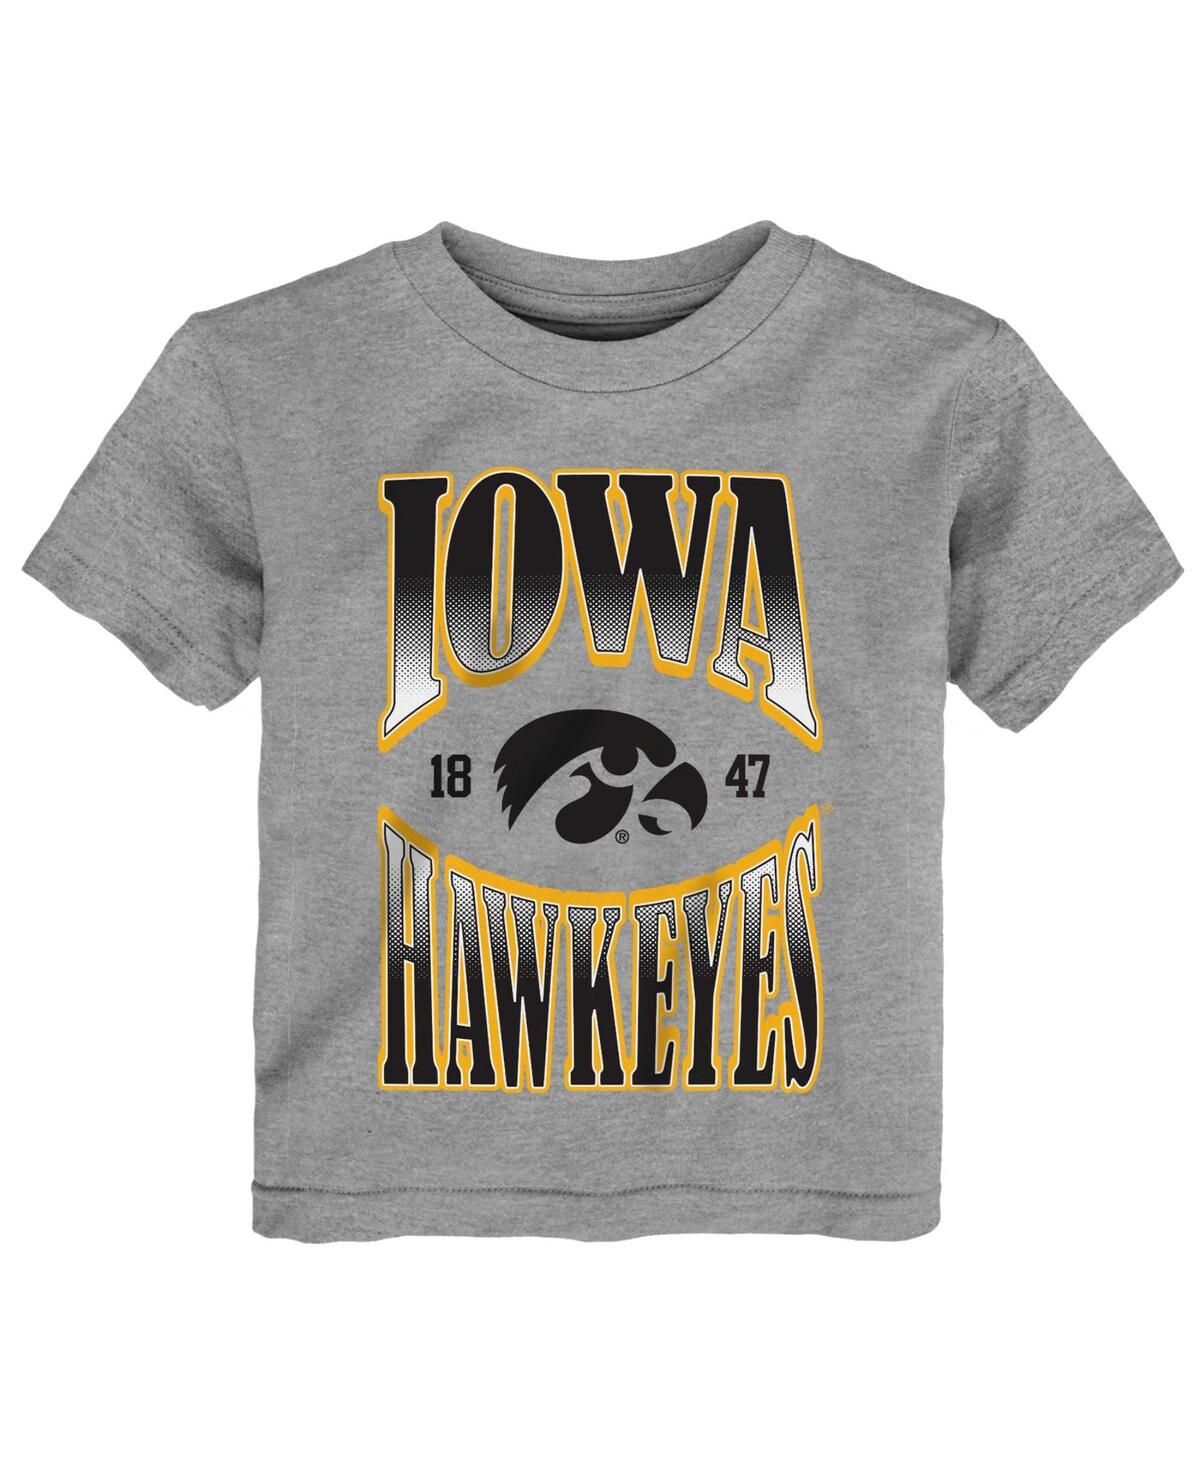 Outerstuff Babies' Toddler Boys And Girls Heather Gray Iowa Hawkeyes Top Class T-shirt